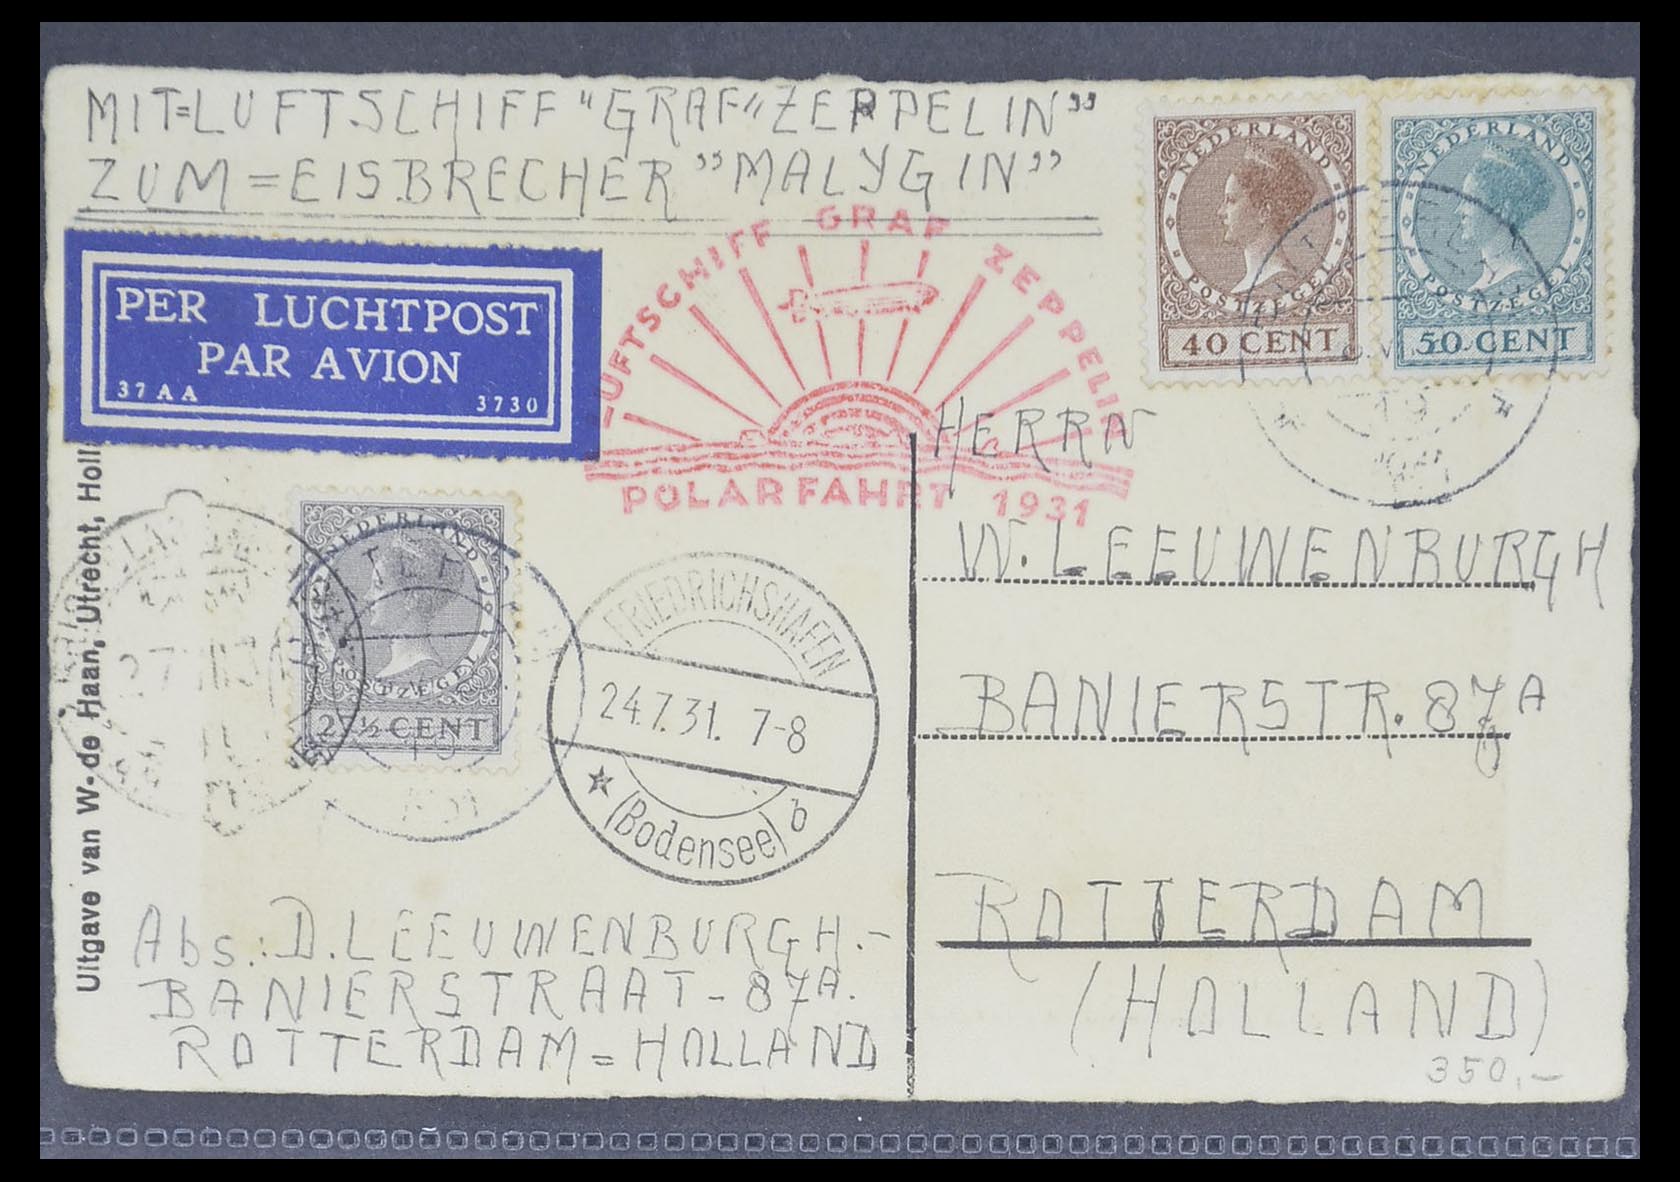 33331 021 - Stamp collection 33331 Zeppelin covers 1929-1931.